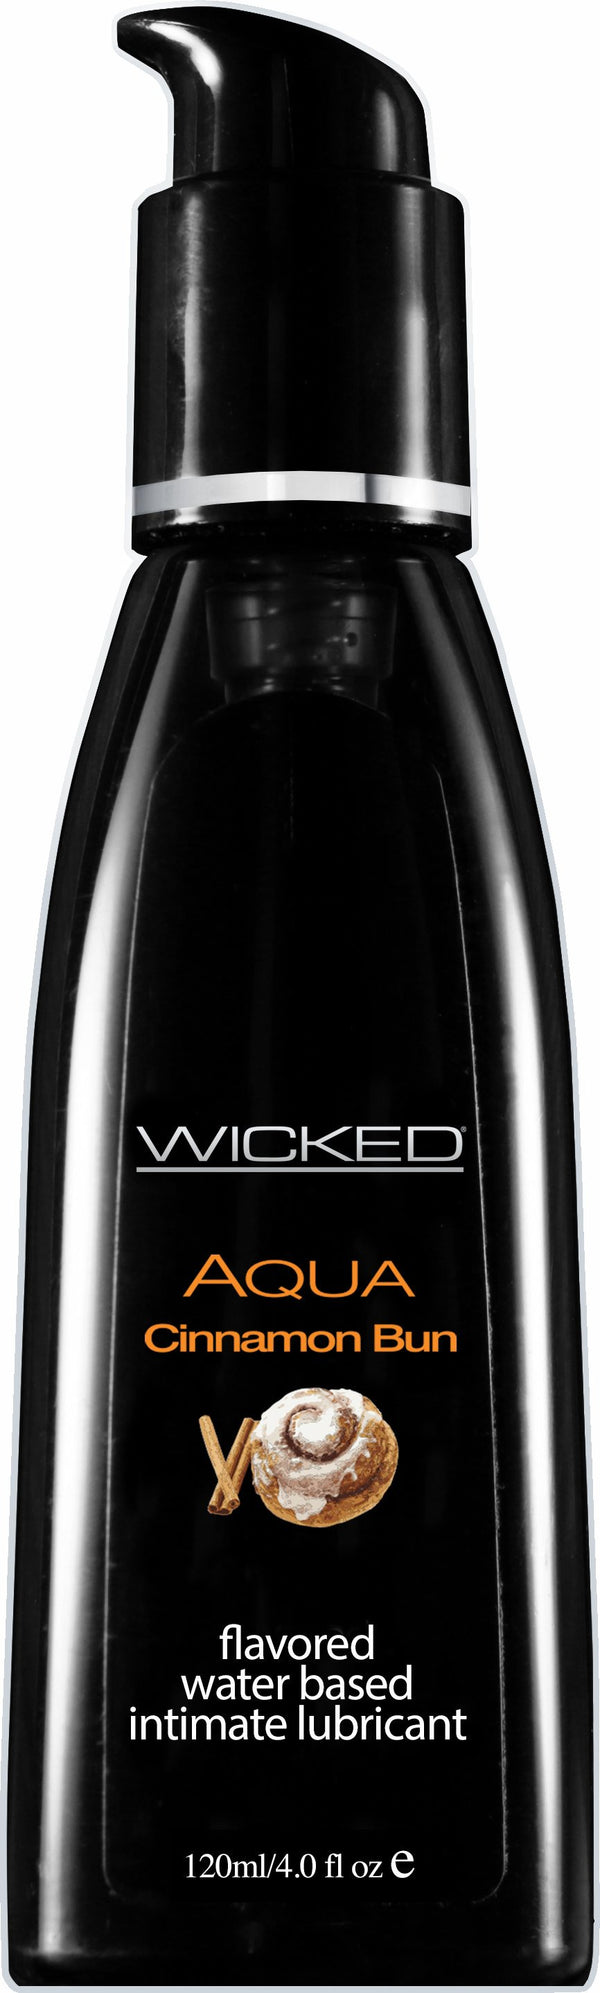 Wicked Lubes Wicked Aqua Cinnamon Bun 4 oz Flavored Water-Based Intimate Lubricant at $11.99